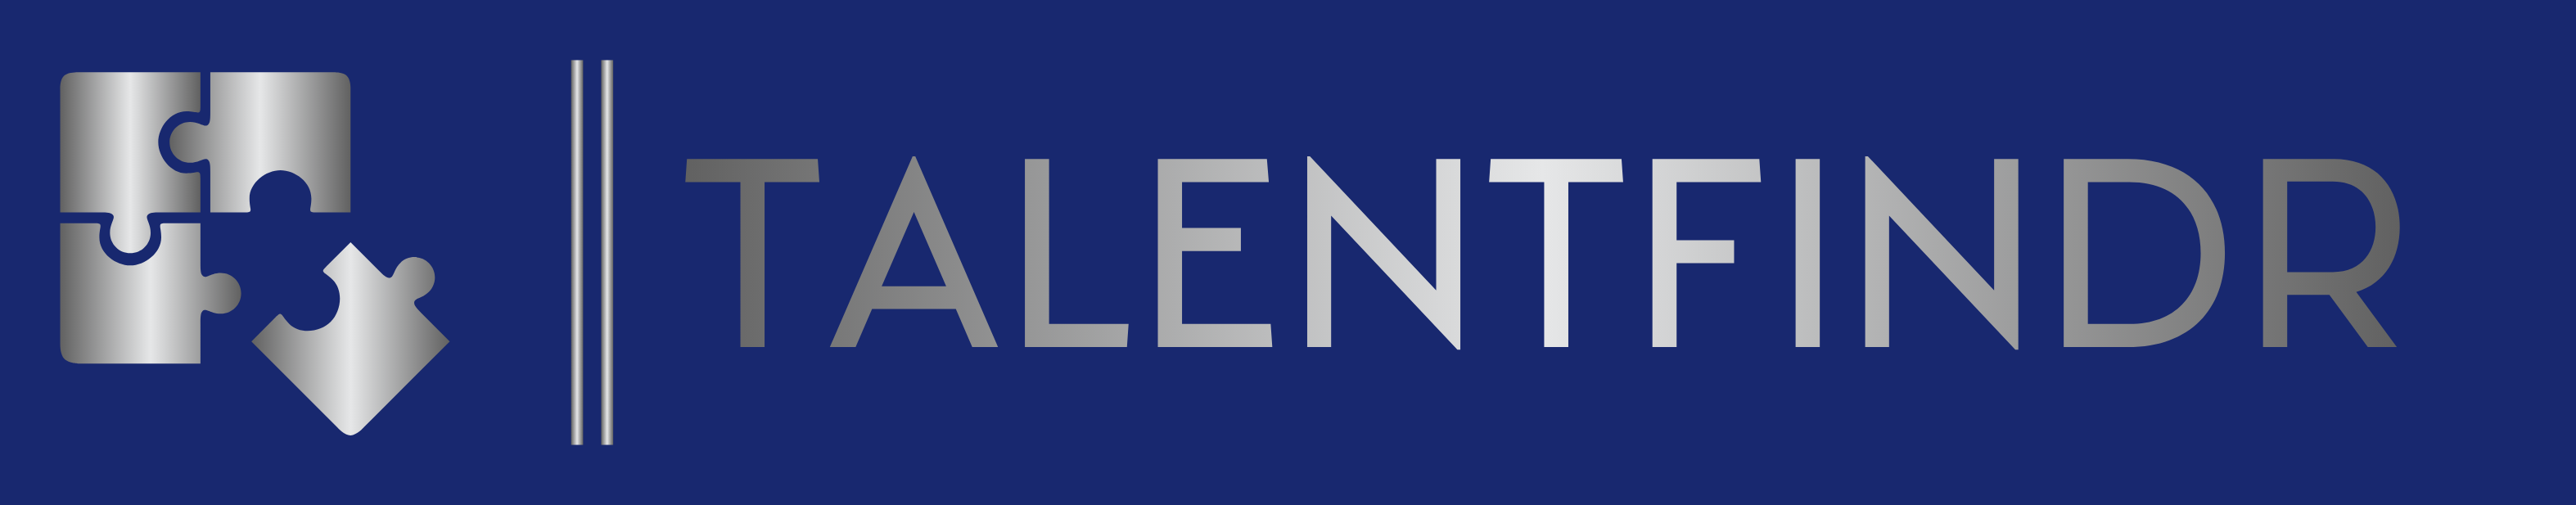 TalentFindr